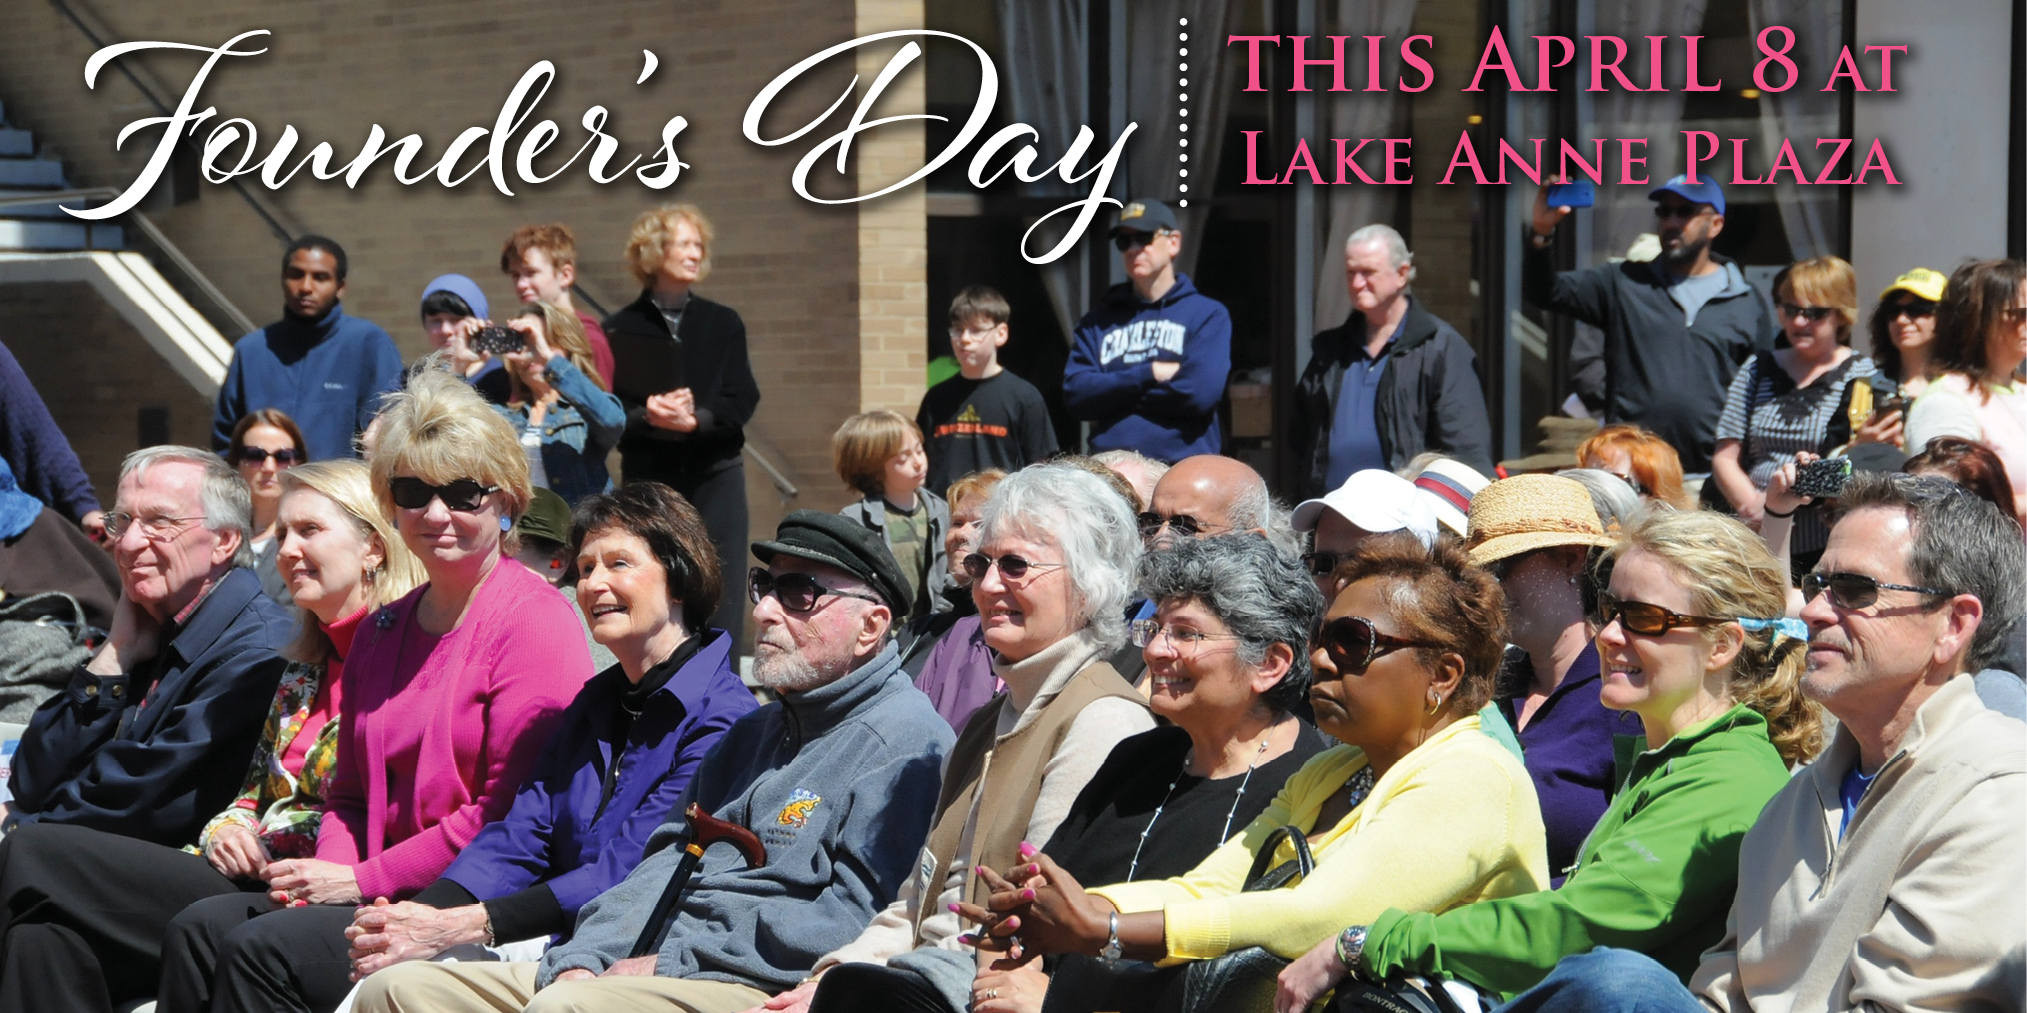 Founders Day April 8 at Lake Anne Plaza